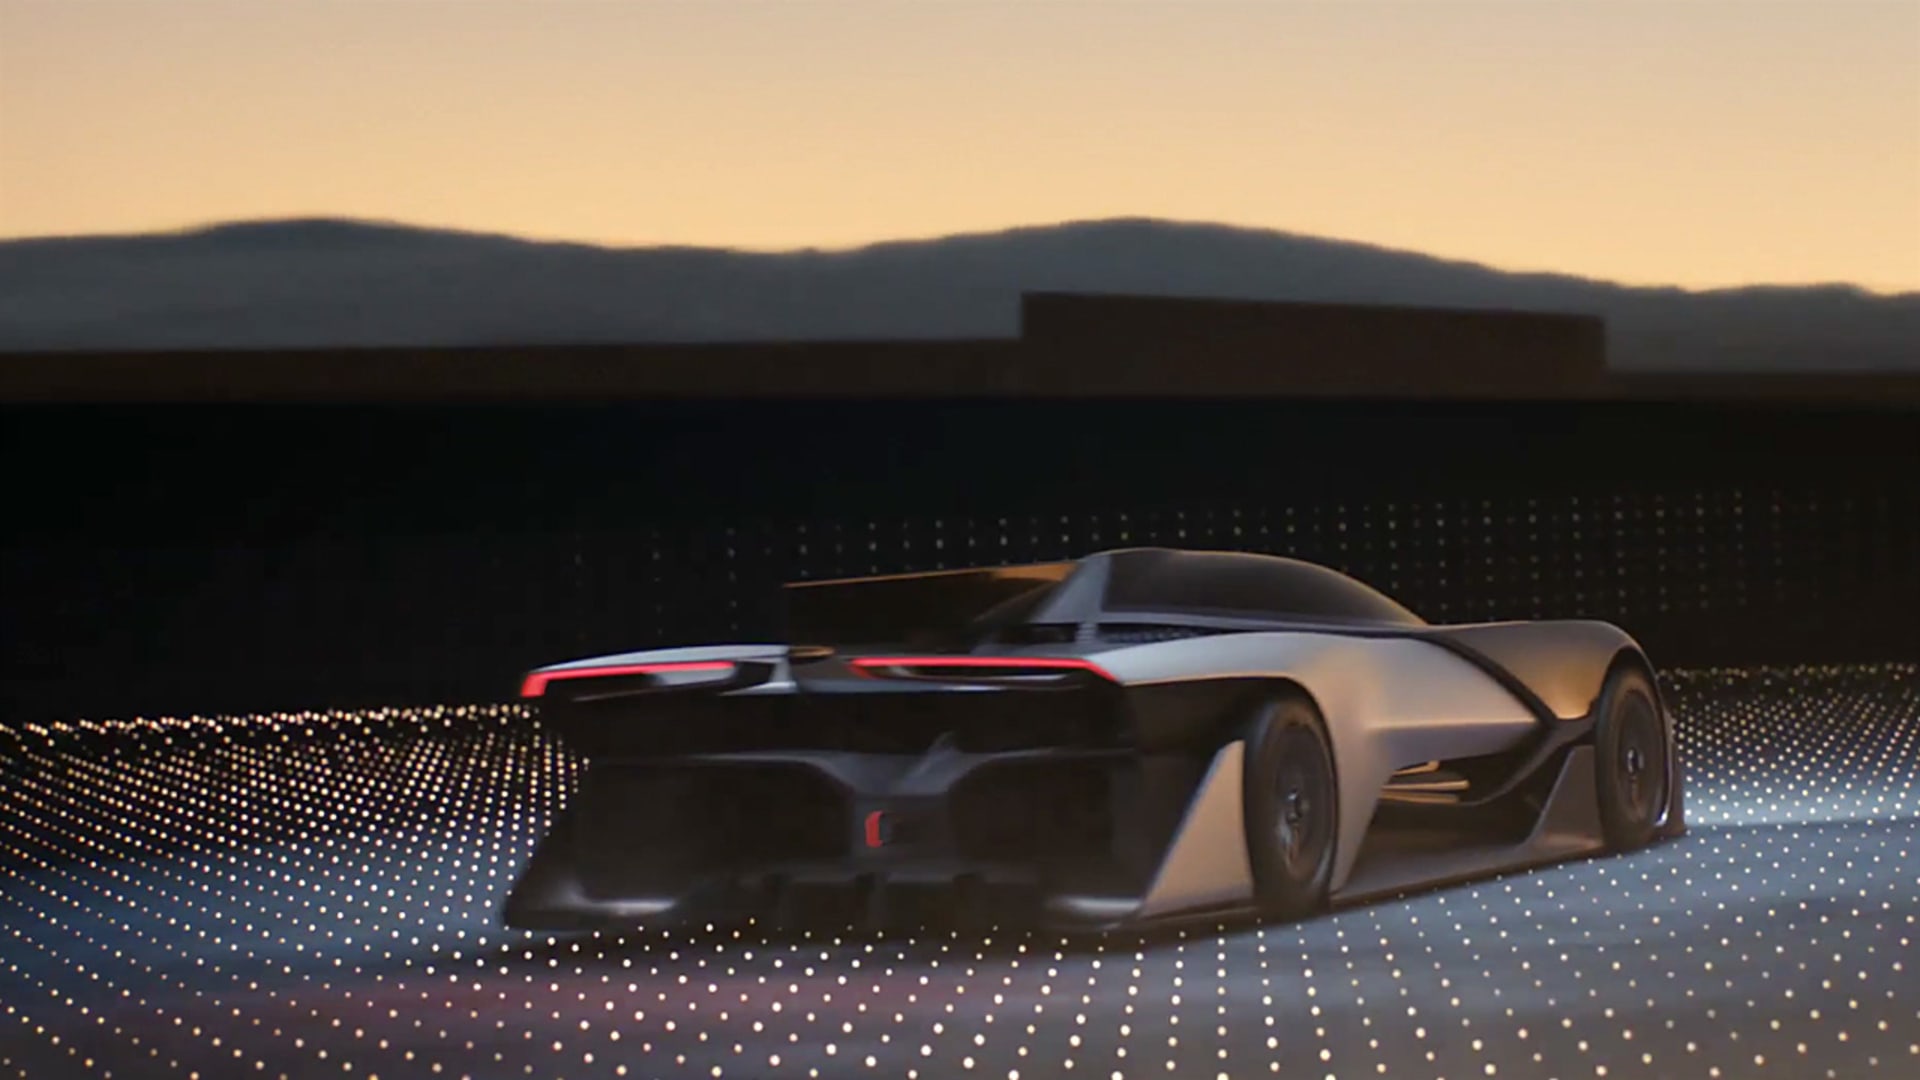 Faraday Future Unveils The Electric Car Of Your Sci-Fi Dreams